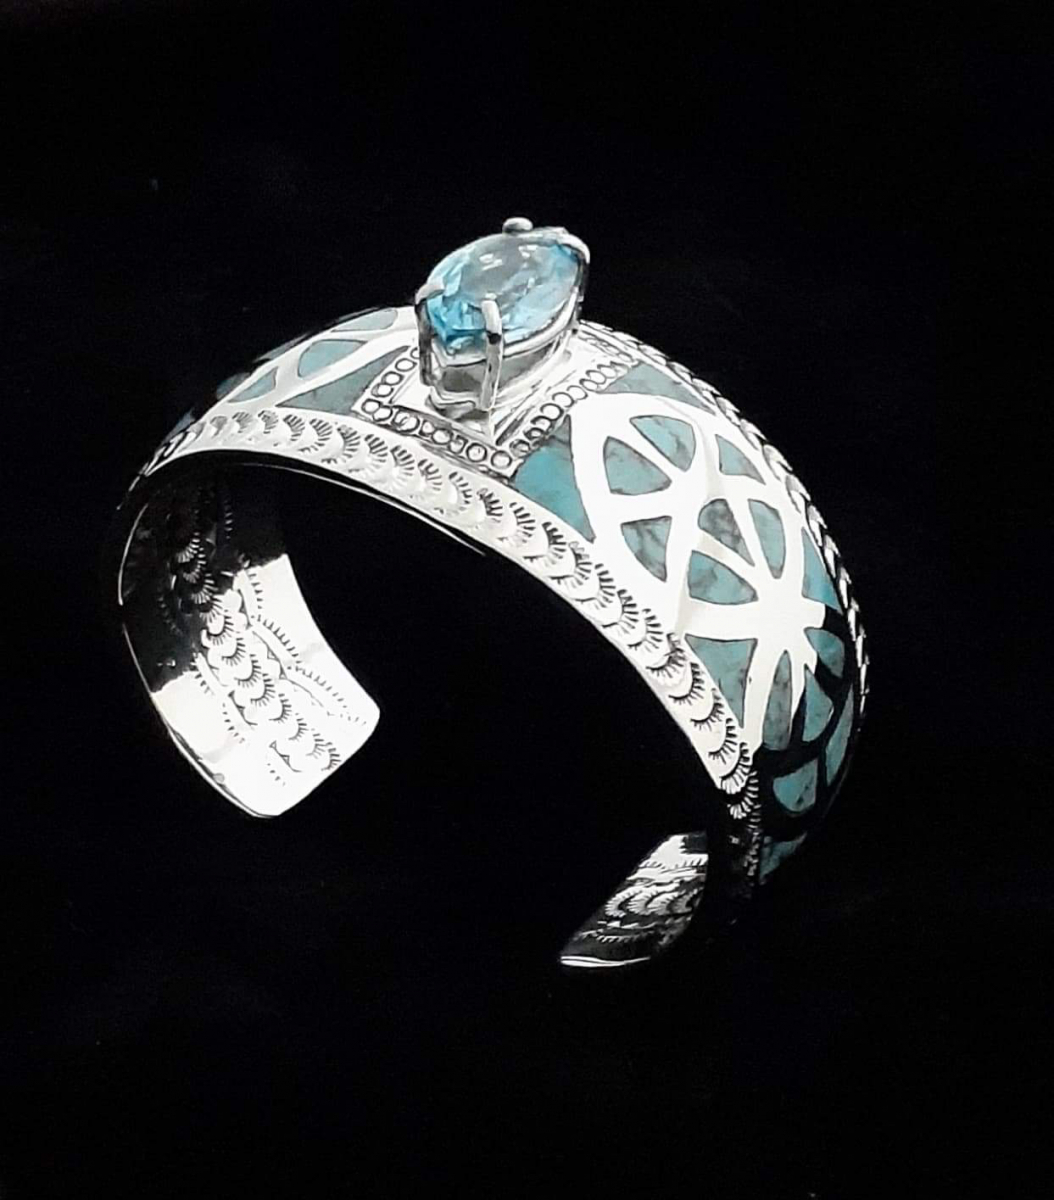 Blue Topaz Center Stone and Turquoise Inlay with Stampwork Inside and Out